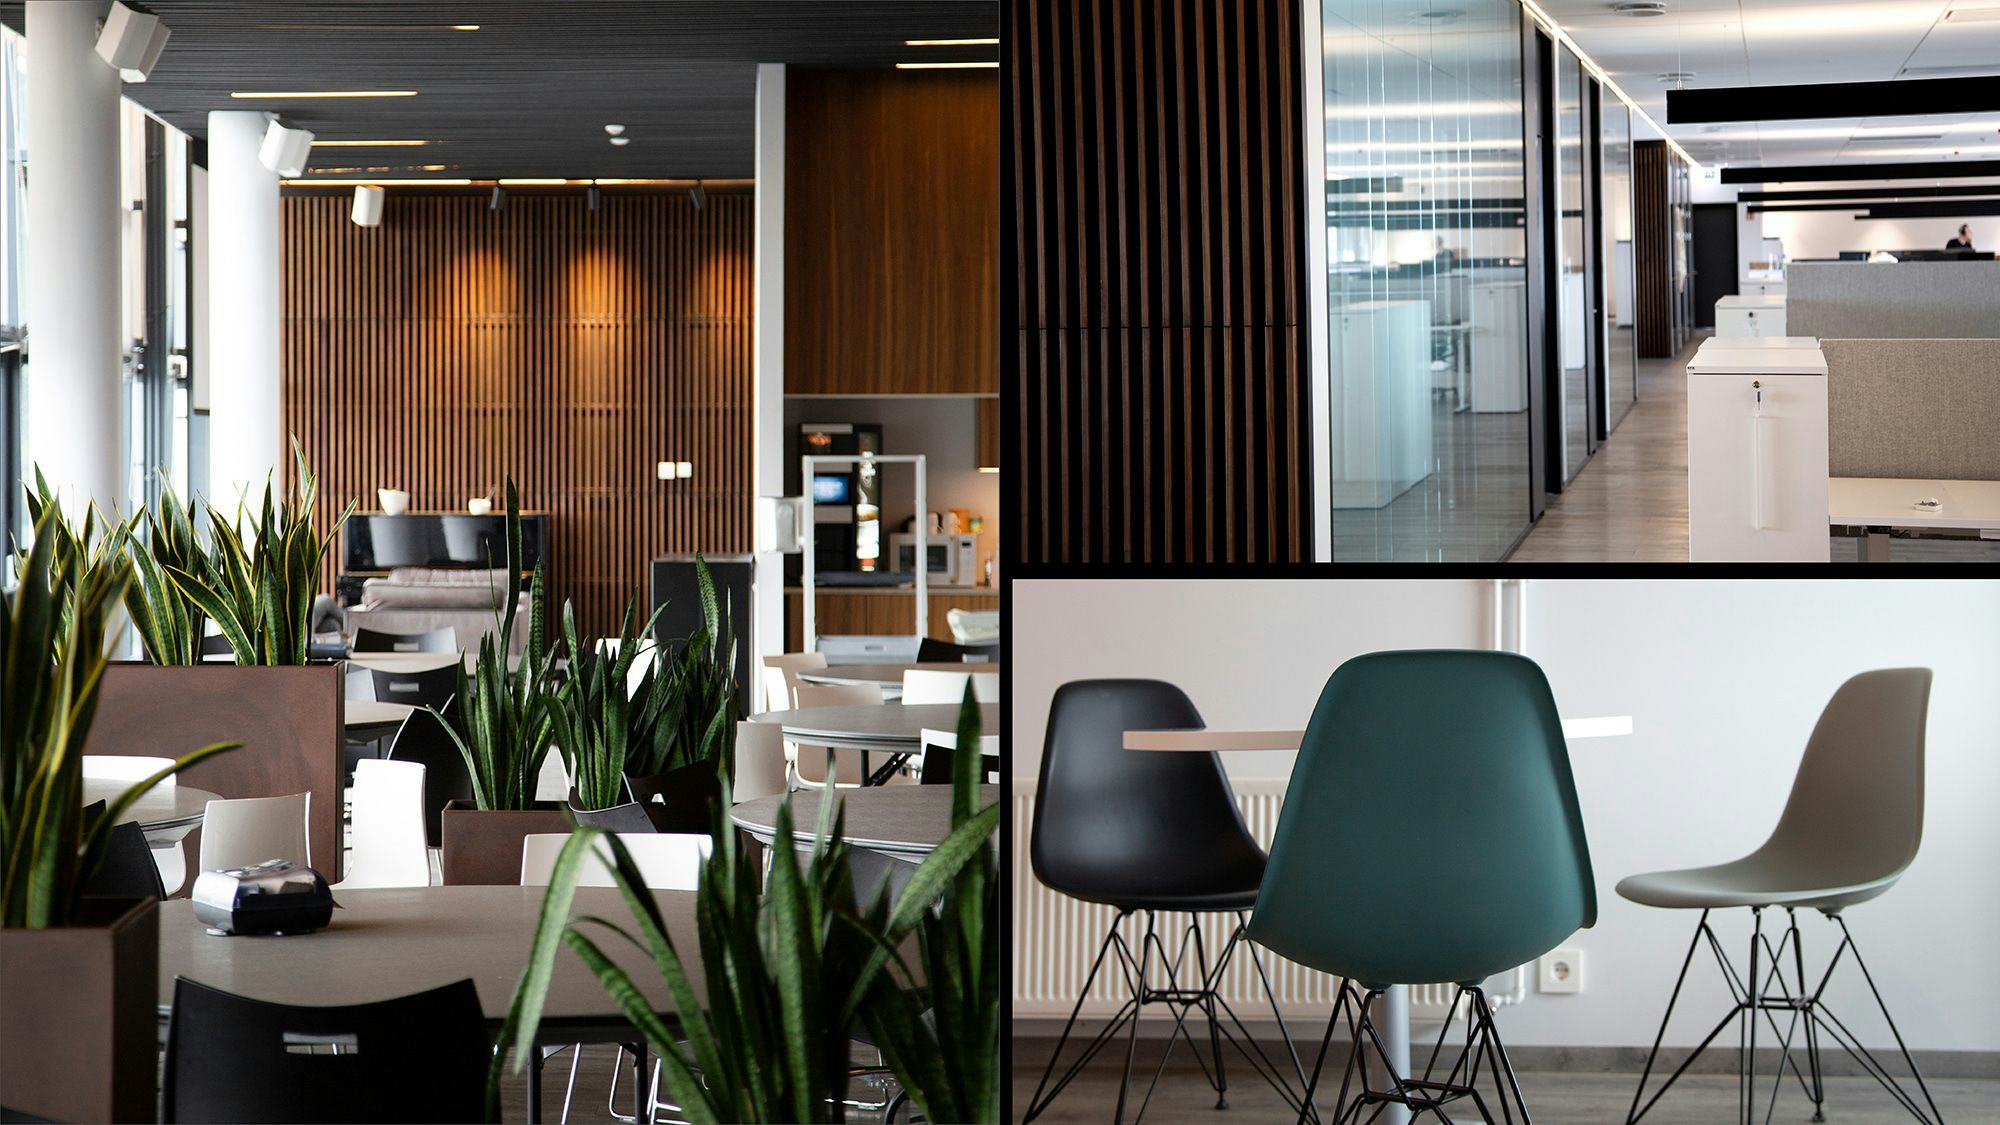 A collage image of three photos. On the left an overview of a canteen or conference space with wooden panels on the walls, plants spread through the space, round tables and chairs. On the right an image of three chairs with steel structured legs around a round table and an image of an office hallway with glass wall and wooden panel on the left side and office spaces on the right side. 